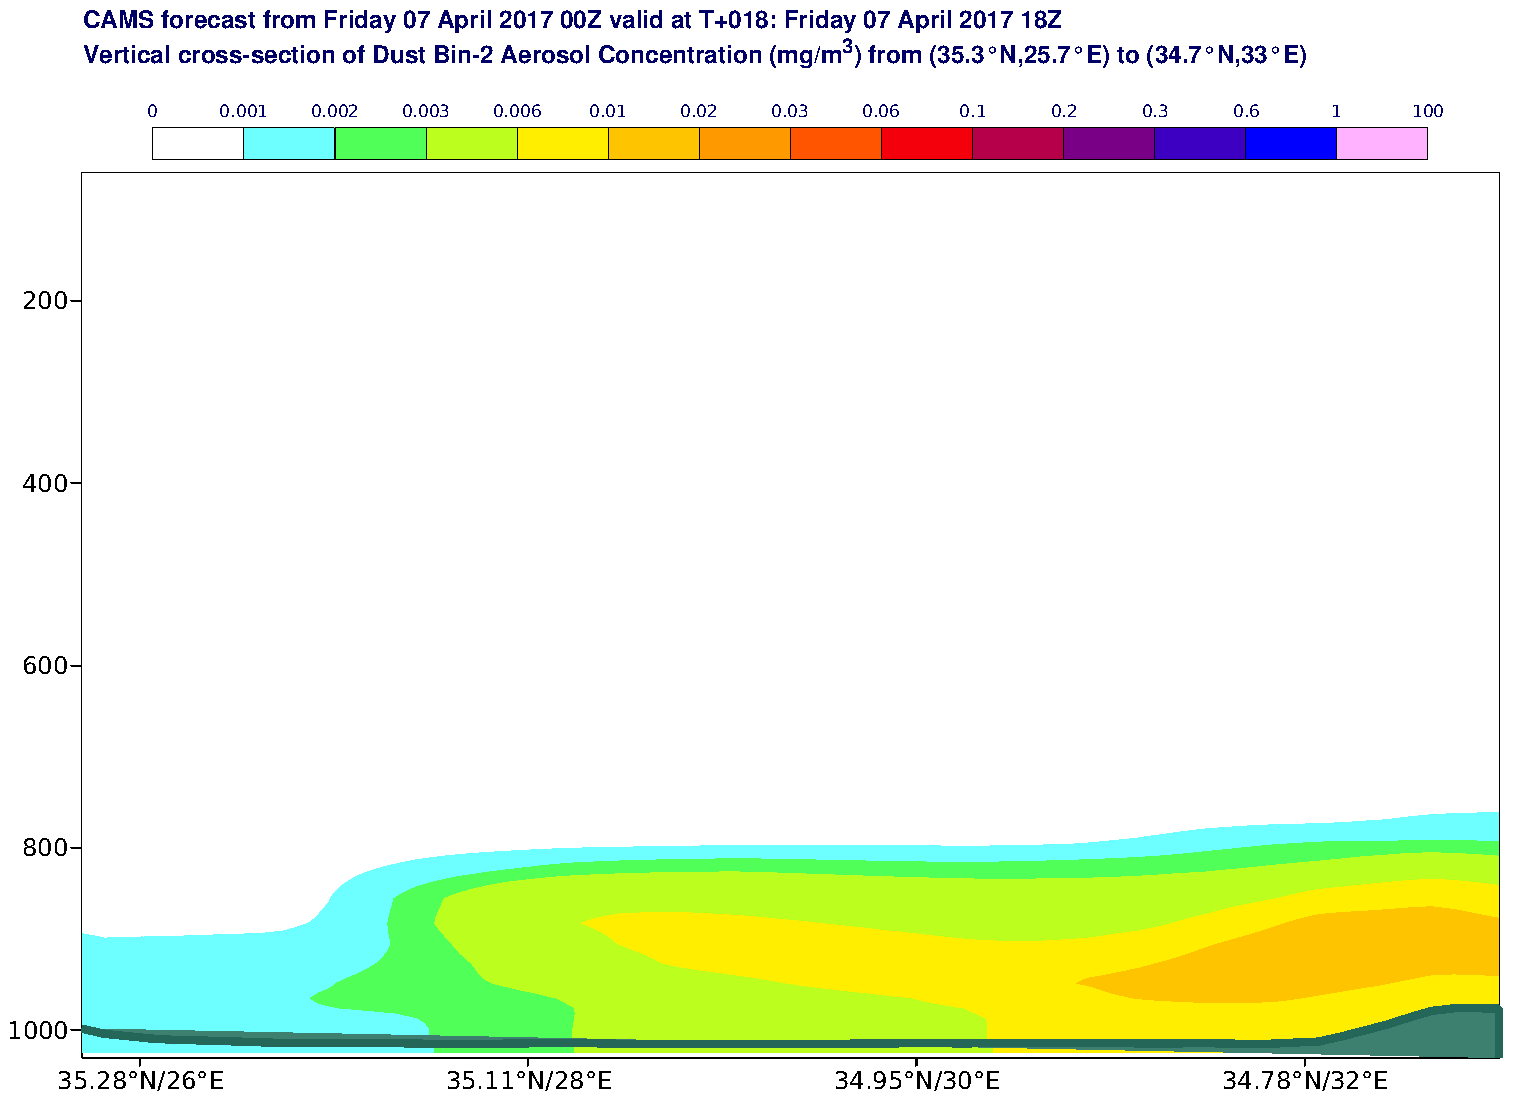 Vertical cross-section of Dust Bin-2 Aerosol Concentration (mg/m3) valid at T18 - 2017-04-07 18:00